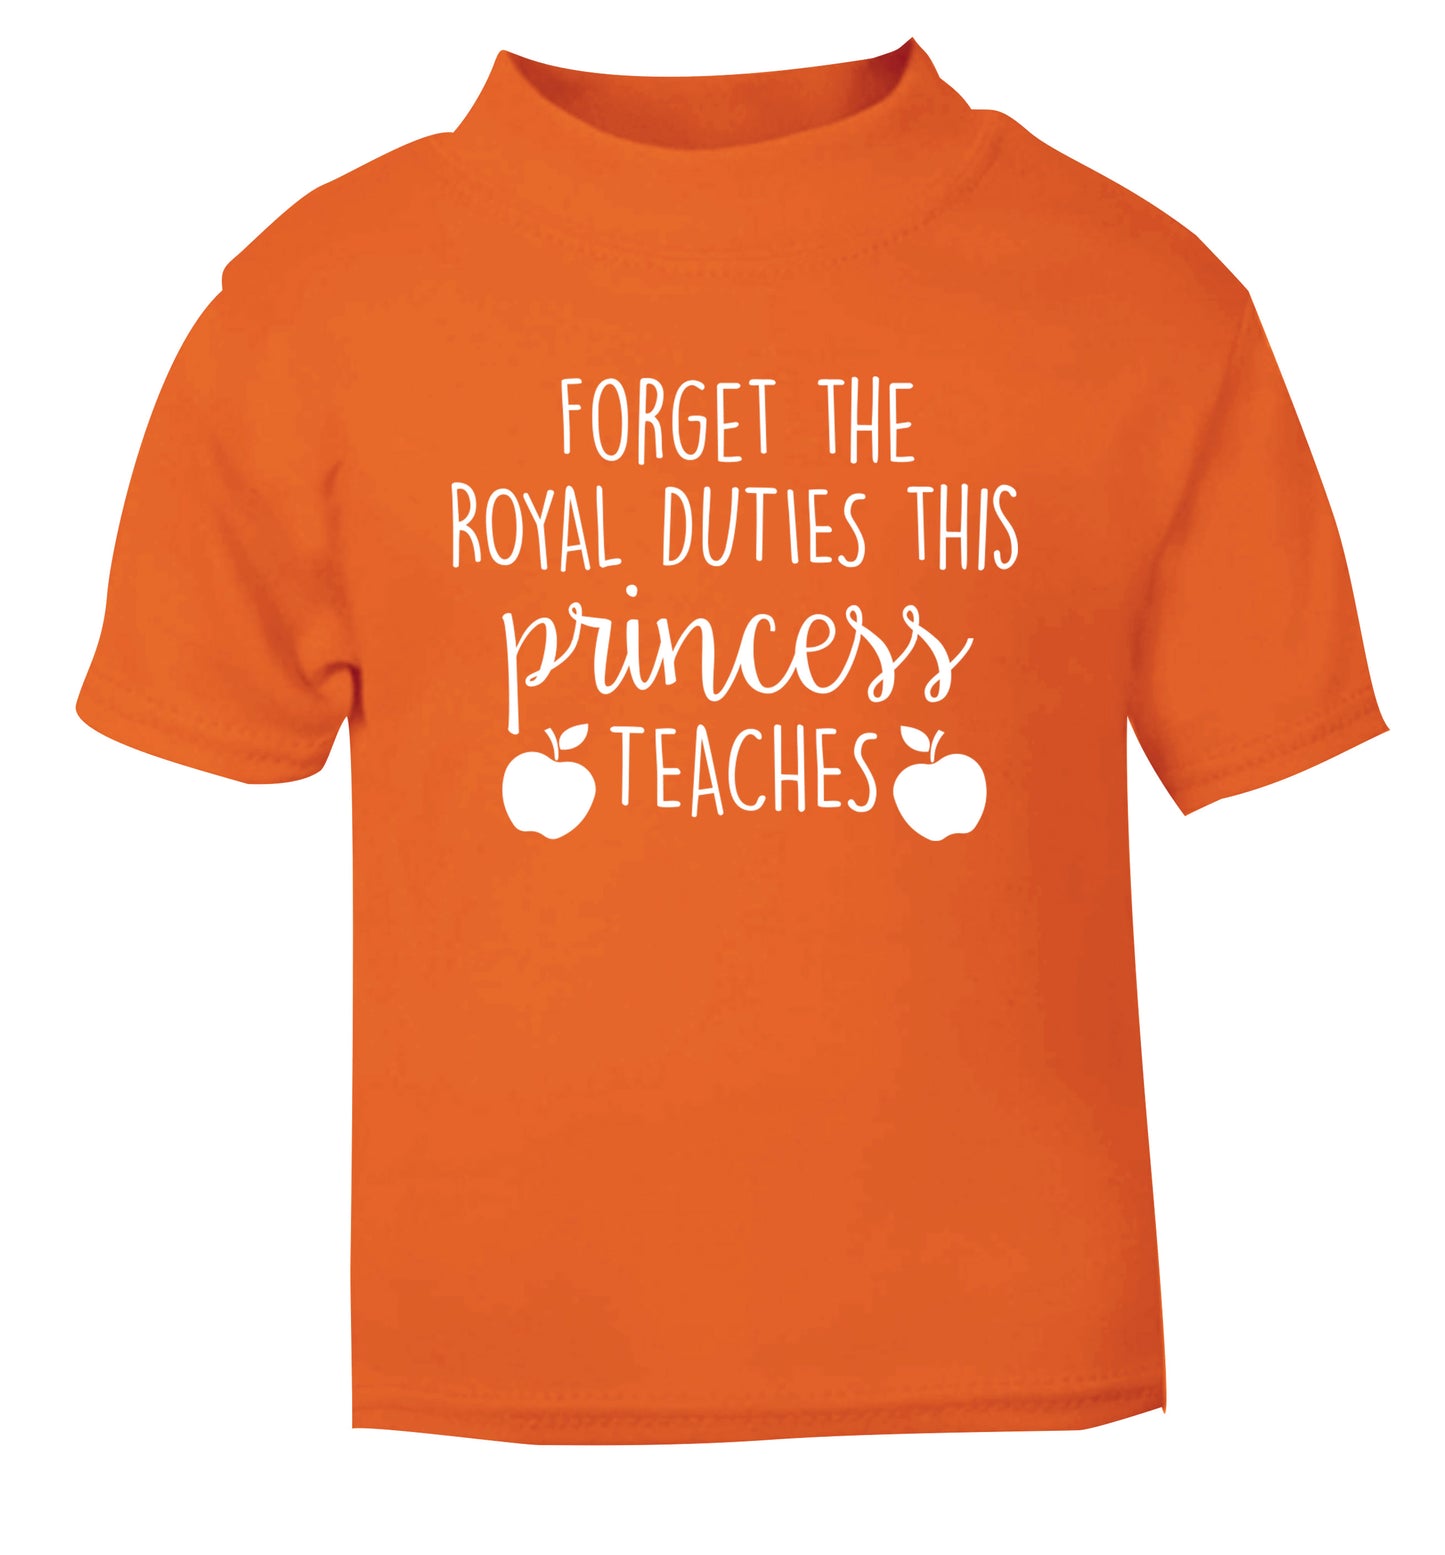 Forget the royal duties this princess teaches orange Baby Toddler Tshirt 2 Years